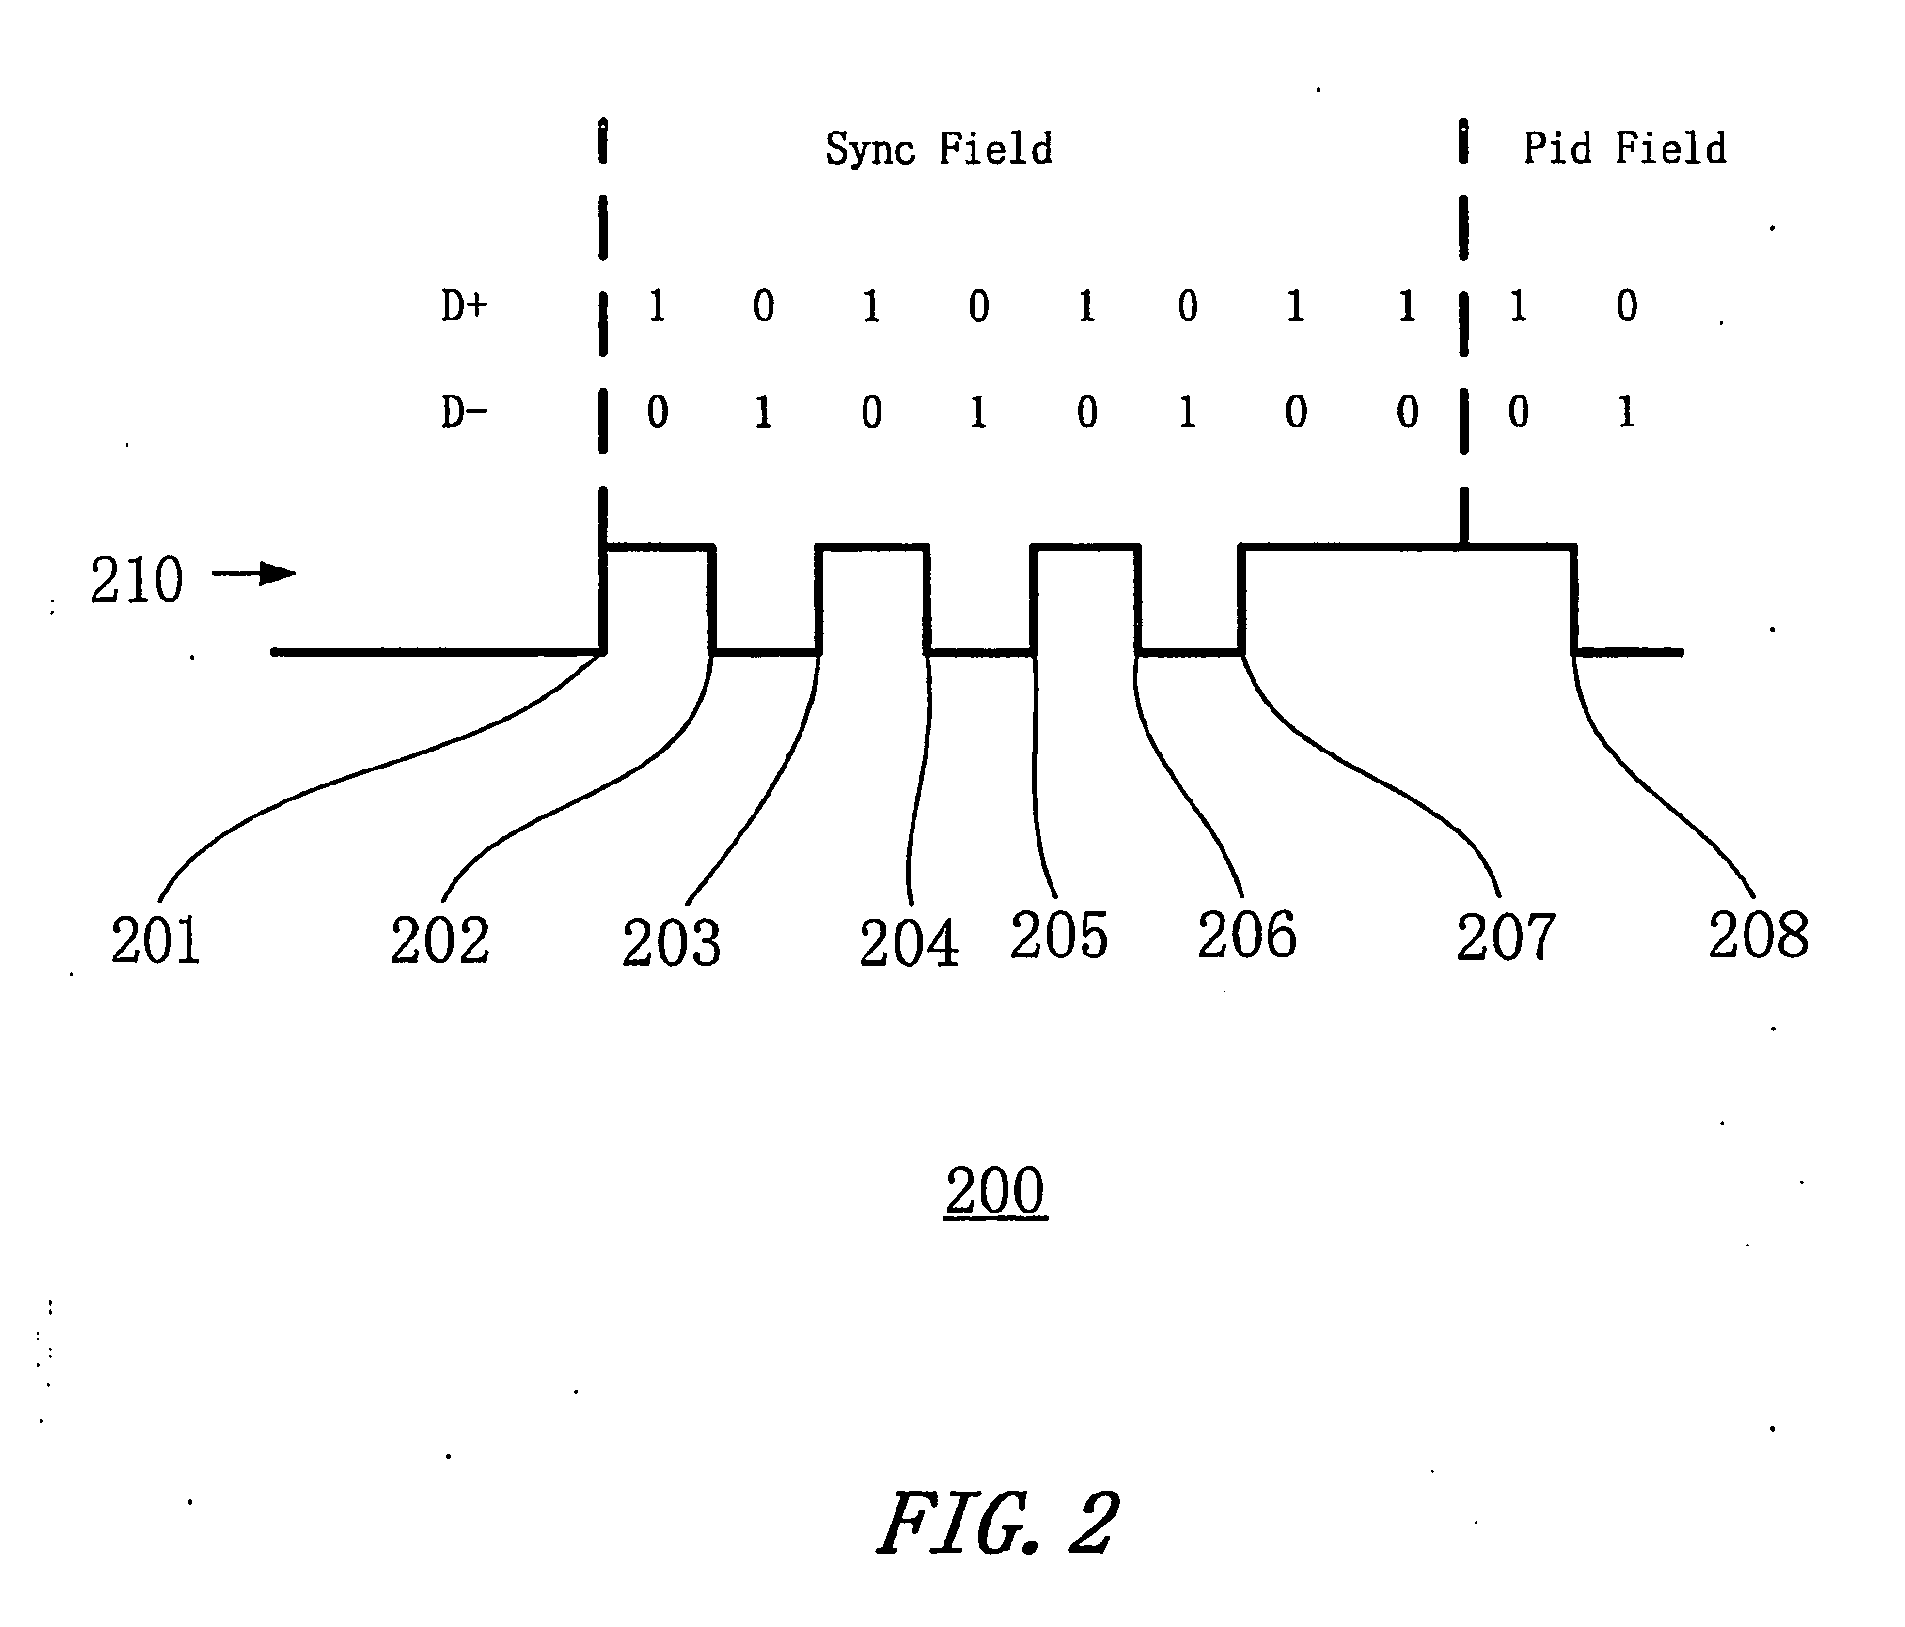 System and method for clock signal synchronization